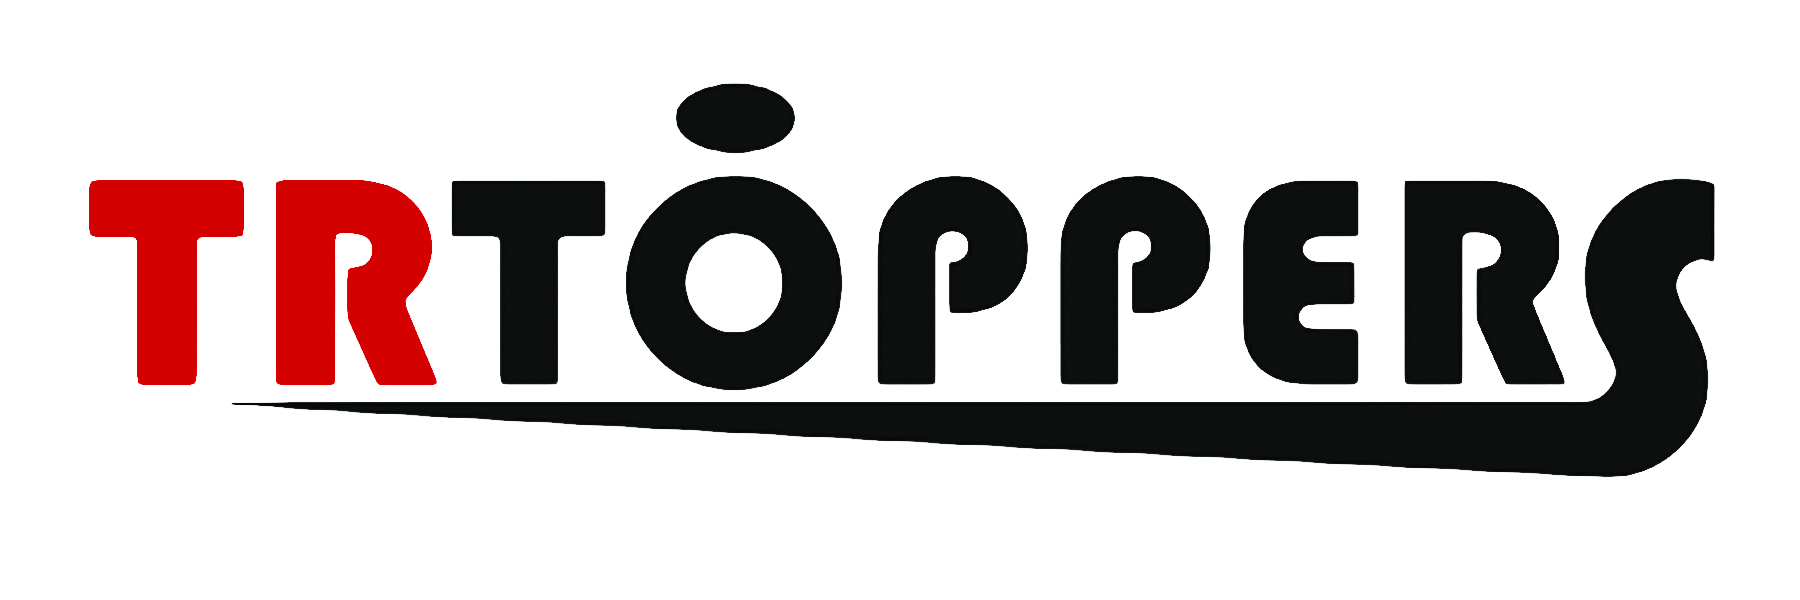 TR Toppers Logo